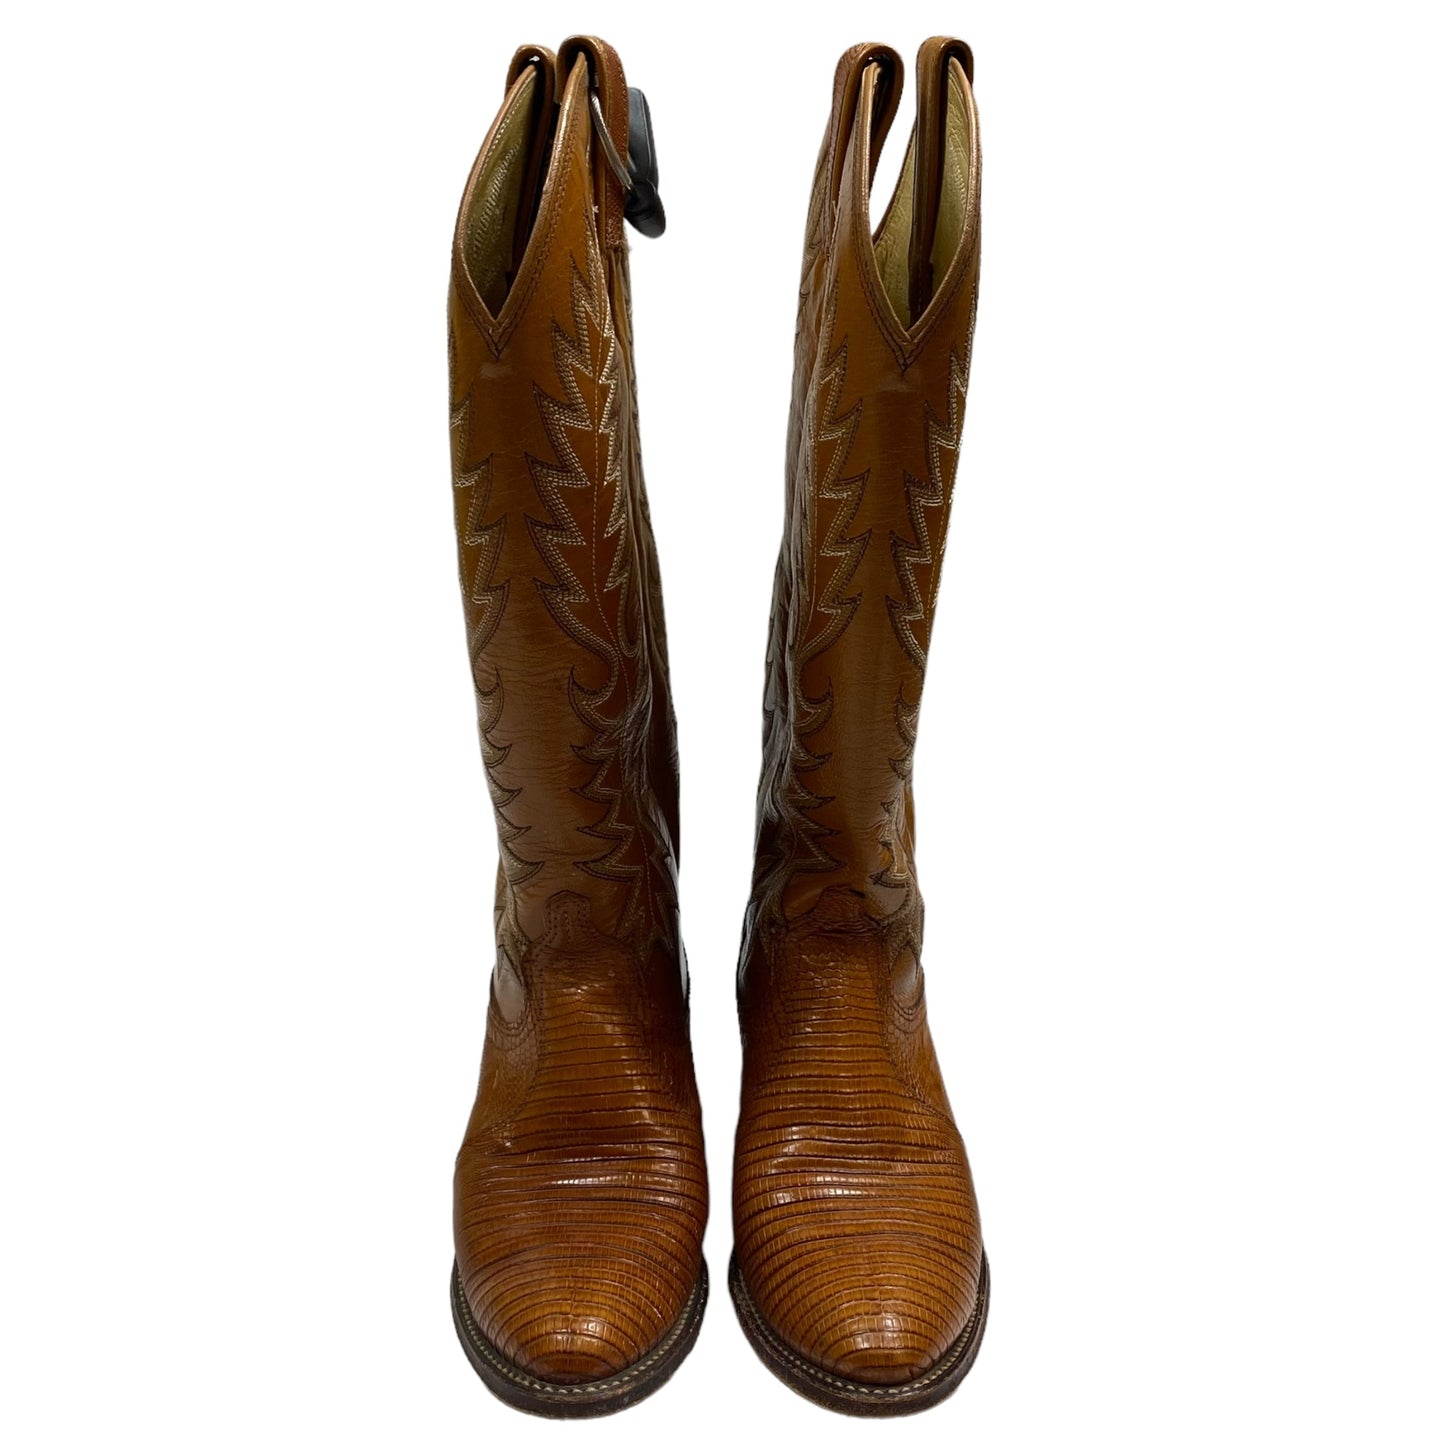 Boots Western By Clothes Mentor  Size: 5